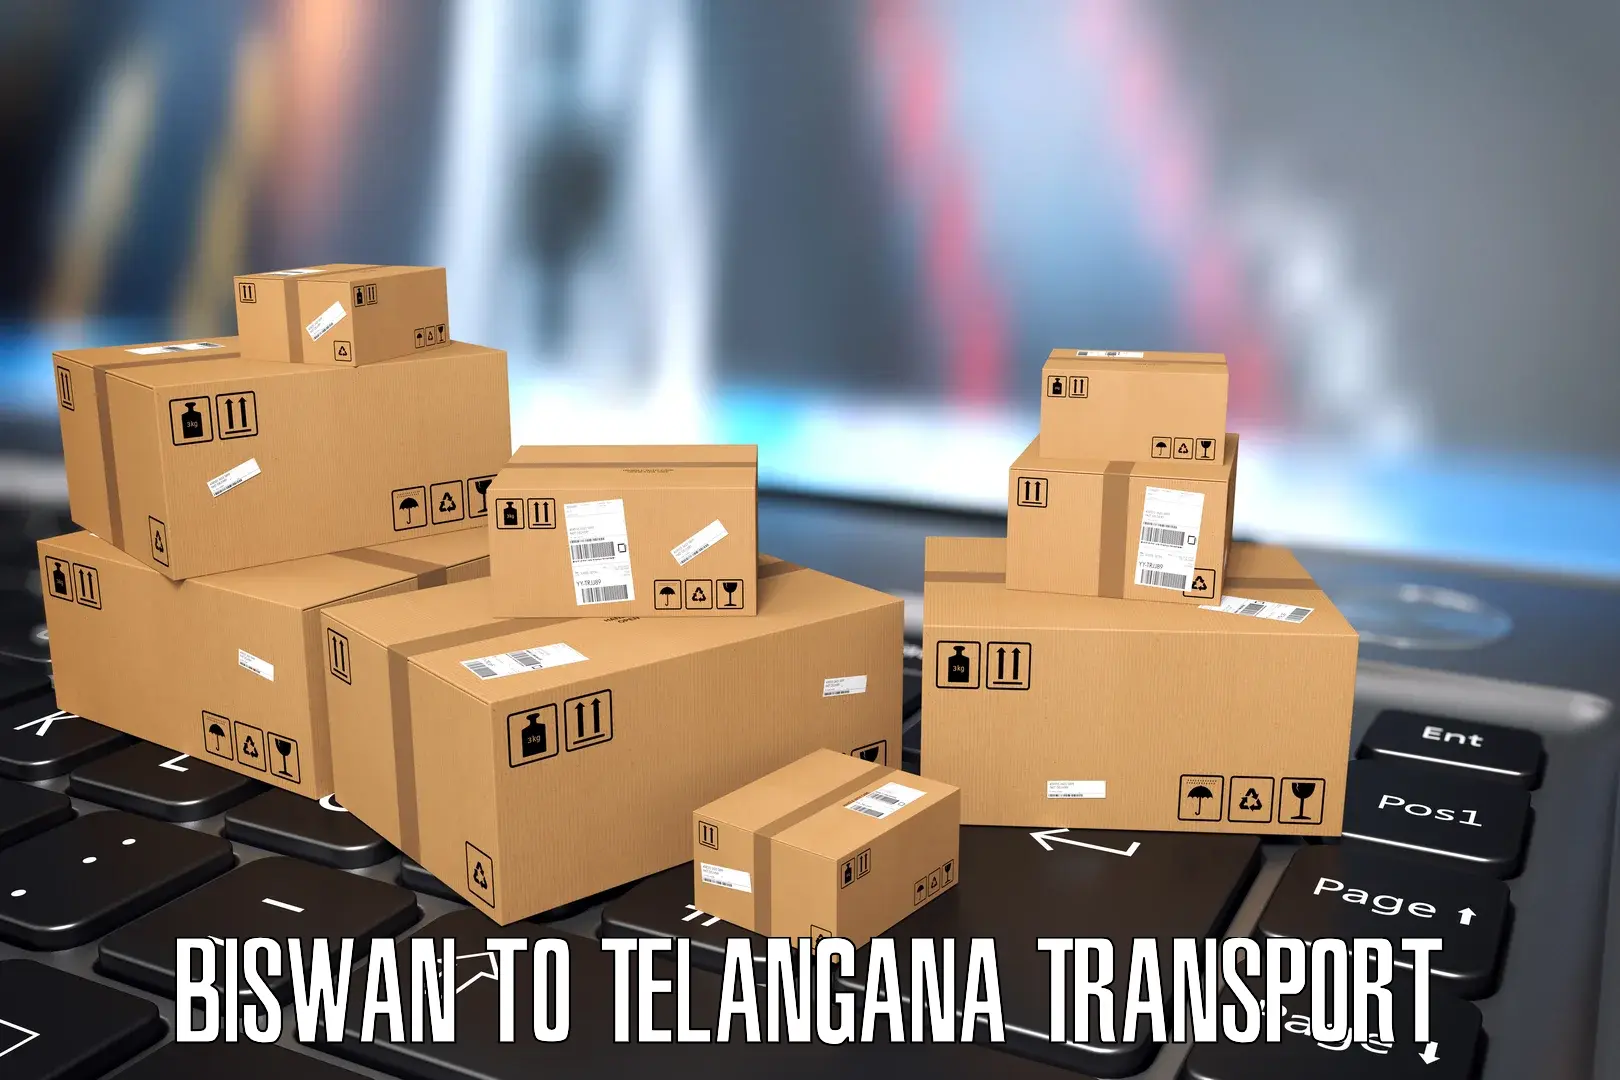 India truck logistics services Biswan to Hyderabad